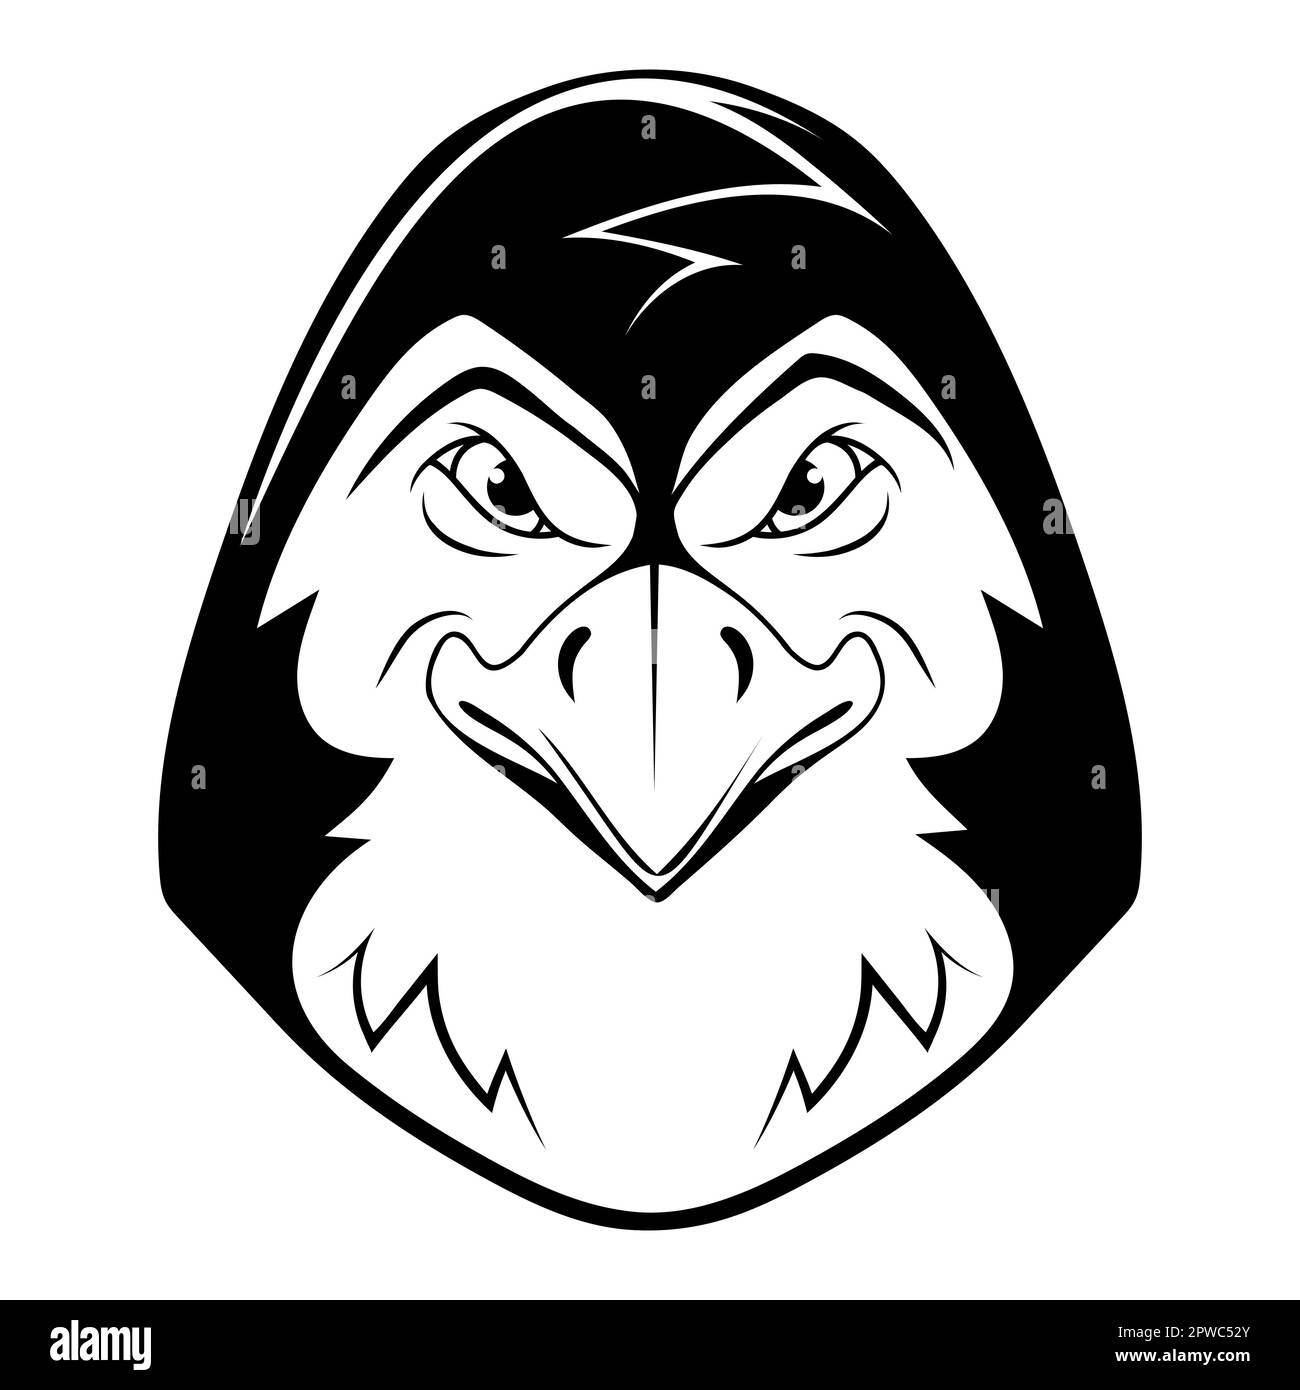 Emperor penguin. Vector illustration of a sketch angry Antarctic animal. Keel-breasted bird Stock Vector